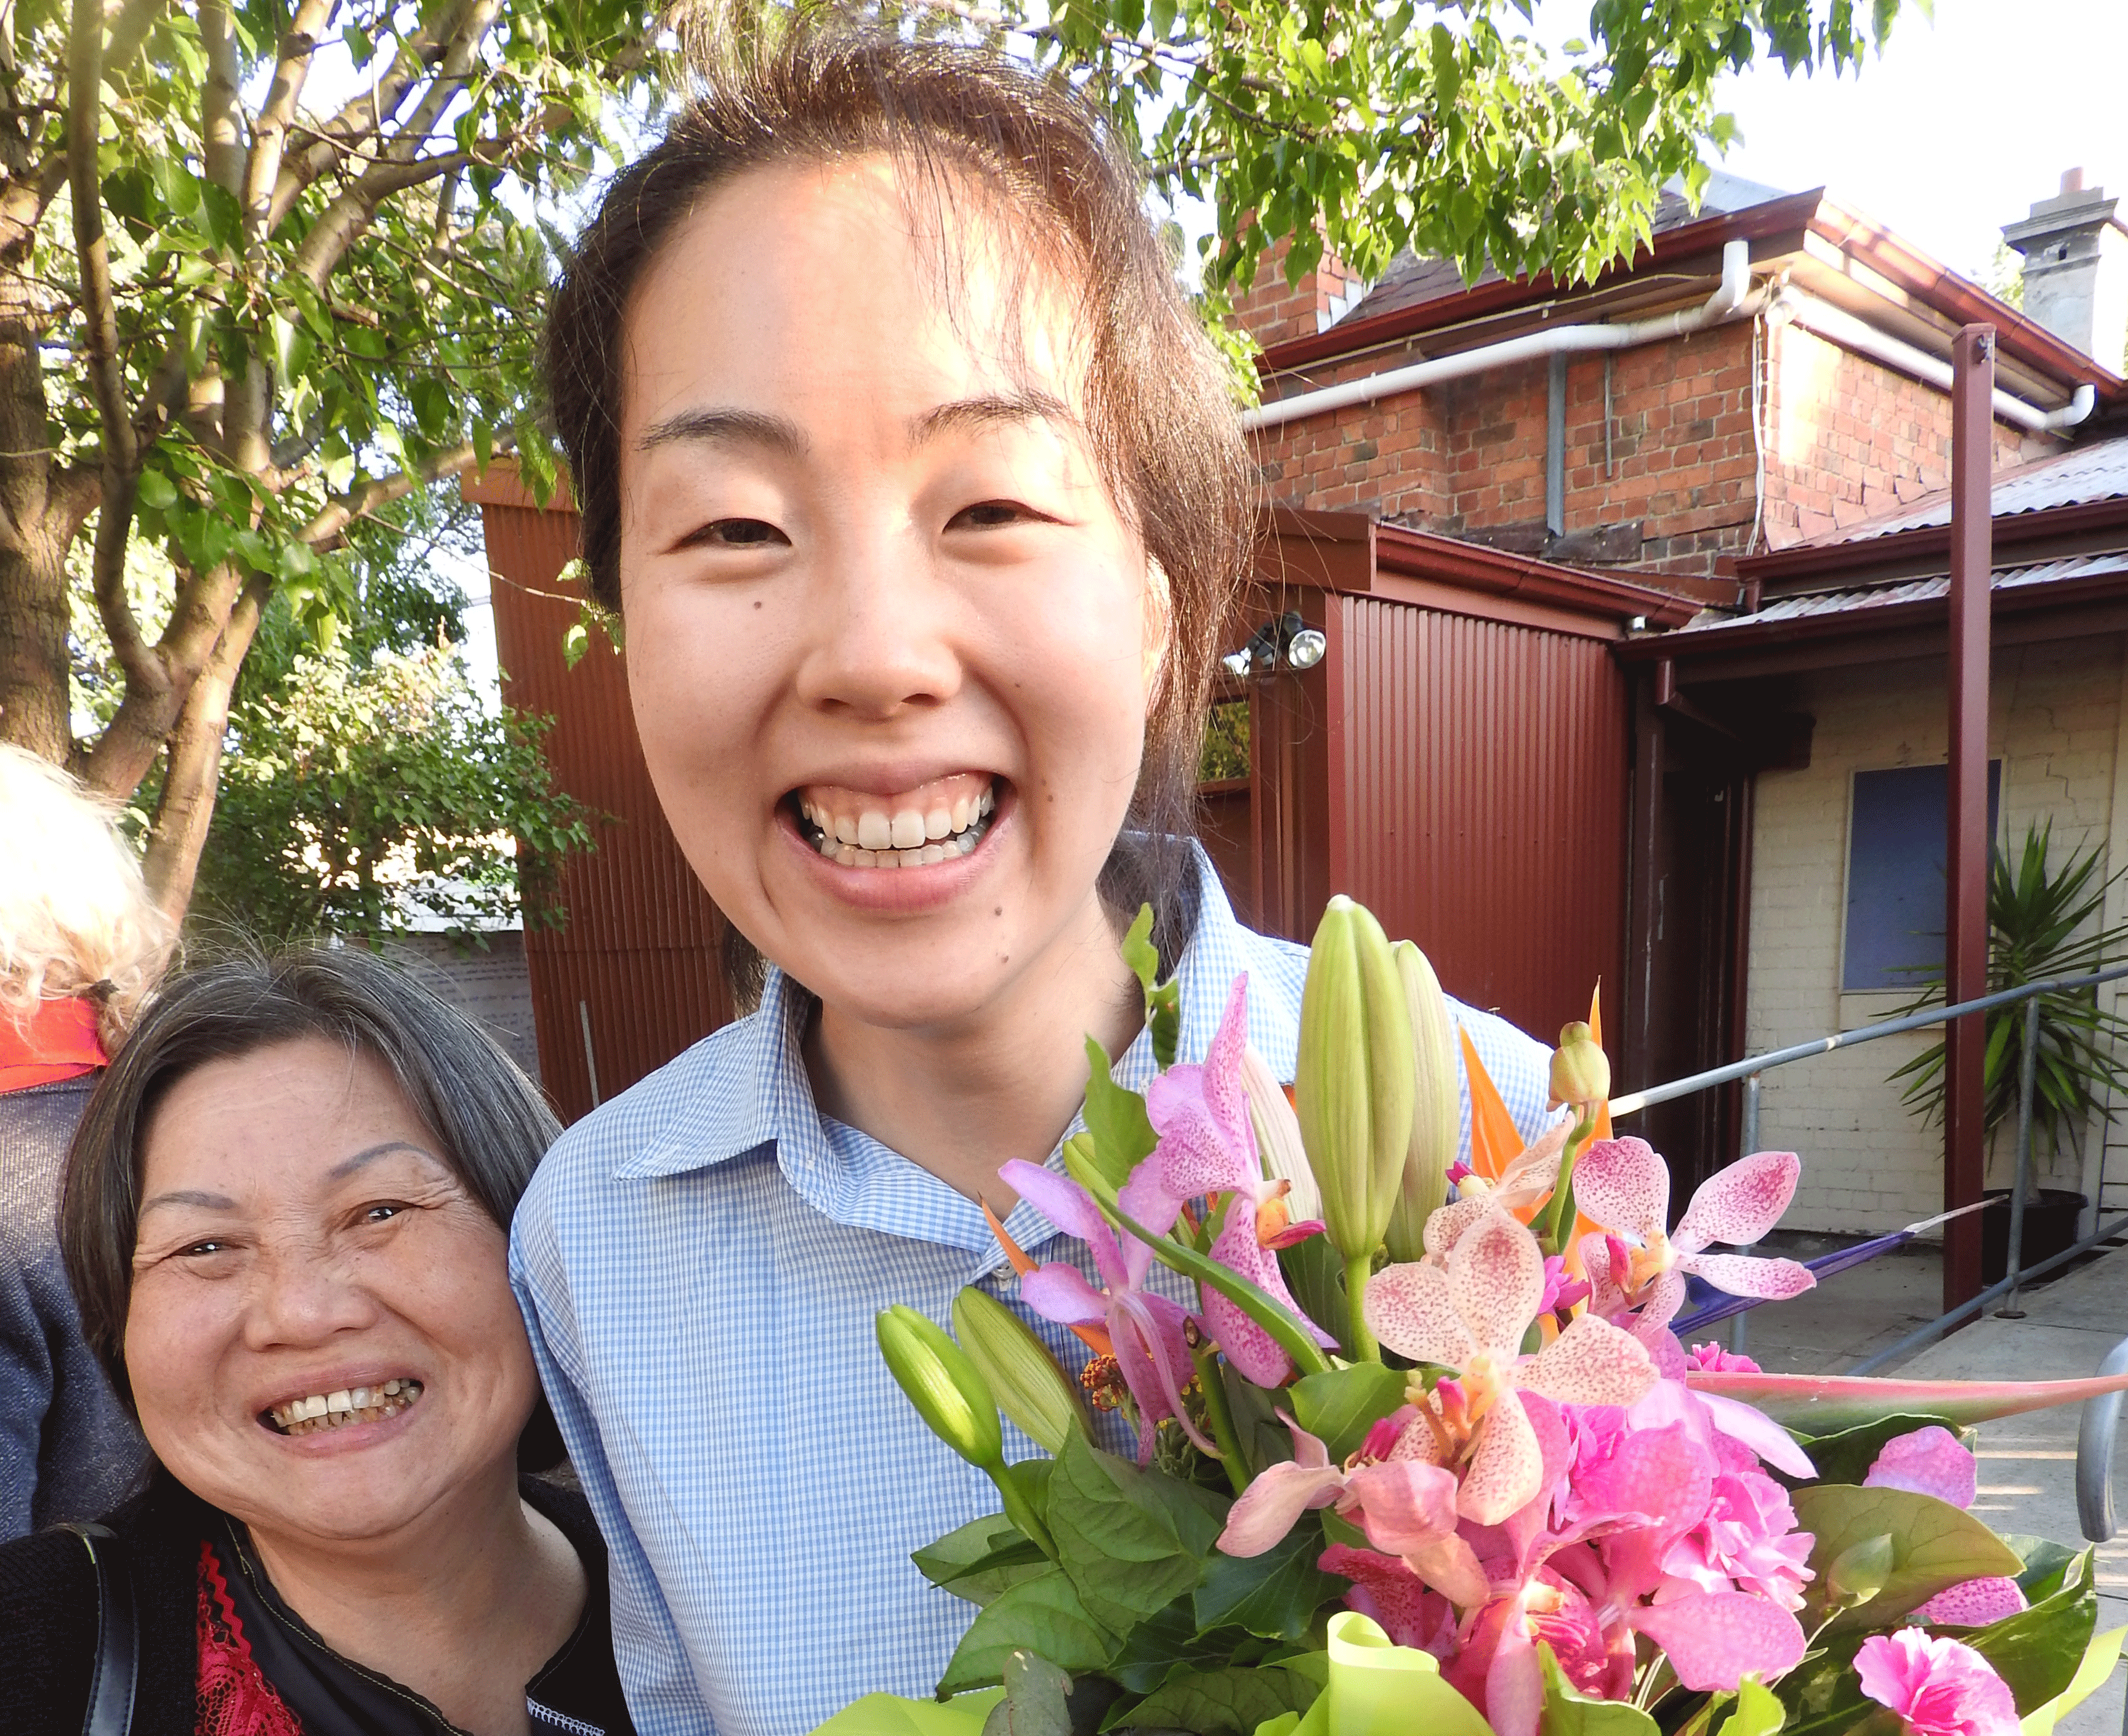 A young woman hugging an older woman and smiling with a bunch of flowers